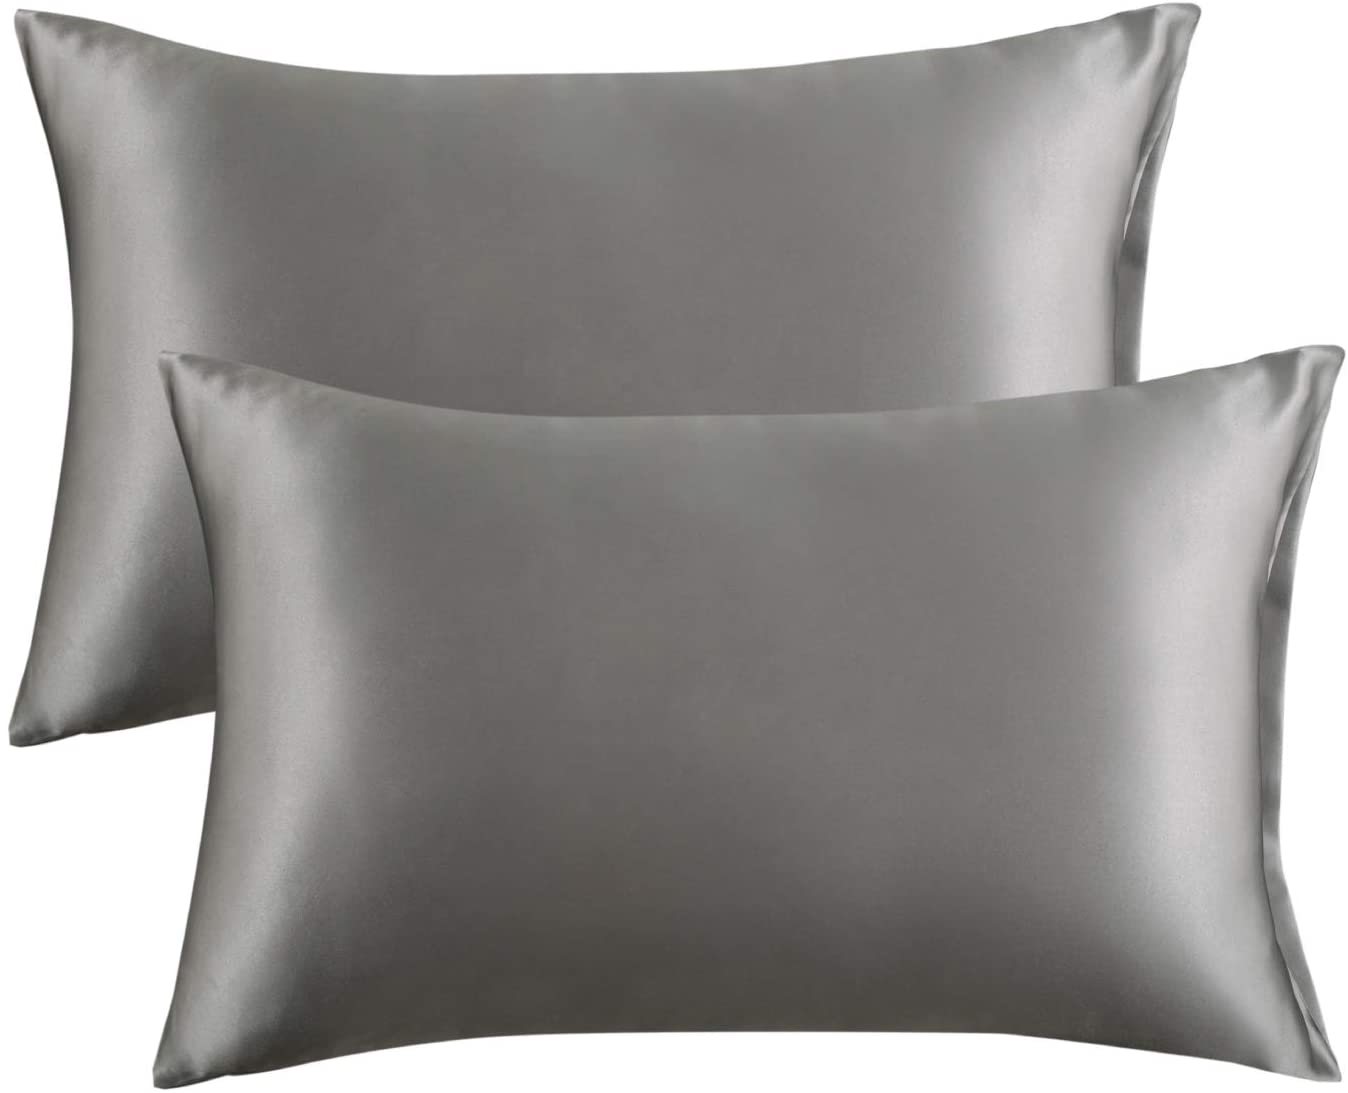 20x30 inches Details about   Bedsure Satin Pillowcase for Hair and Skin P Queen Size 2-Pack 